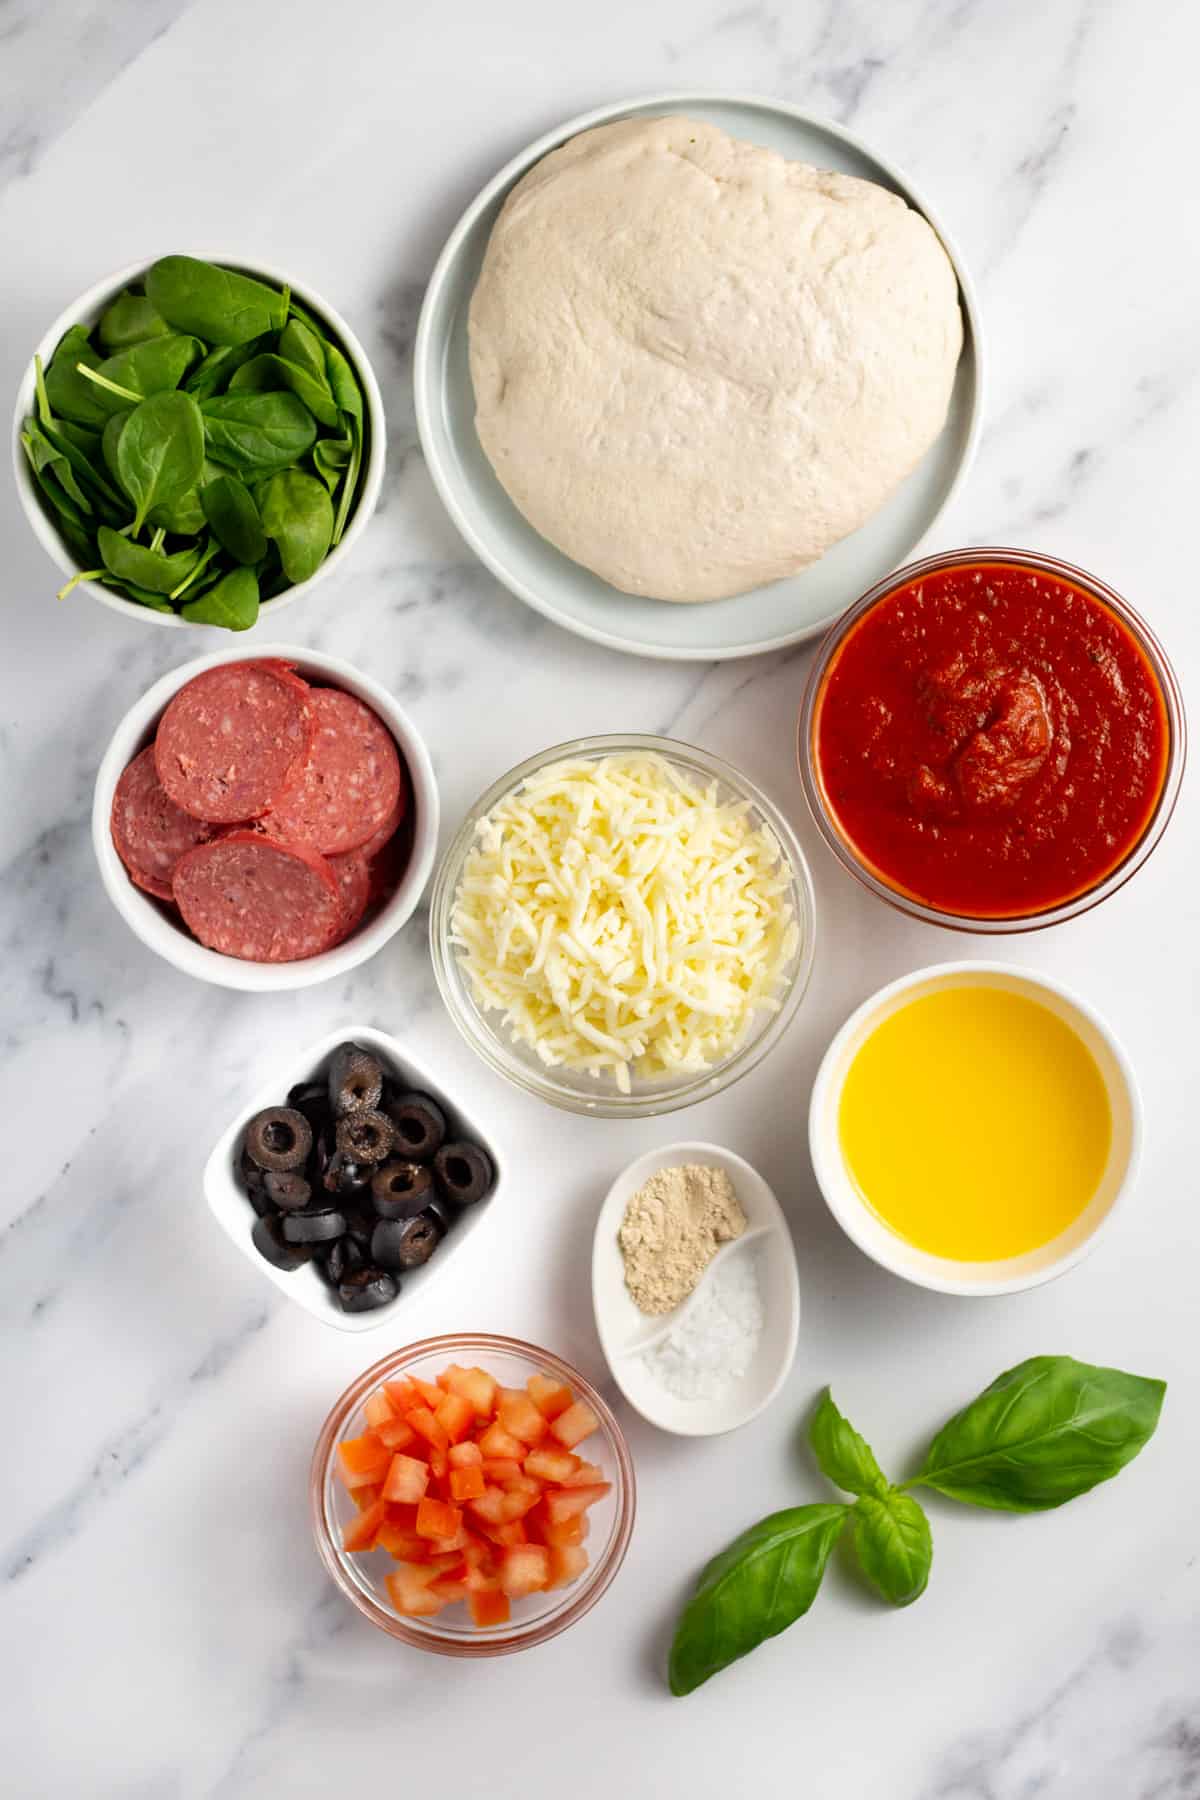 pizza dough, sauce, butter, mozzarella, pepperoni, olives, basil, salt, parsley and garlic powder in bowls on a cutting board